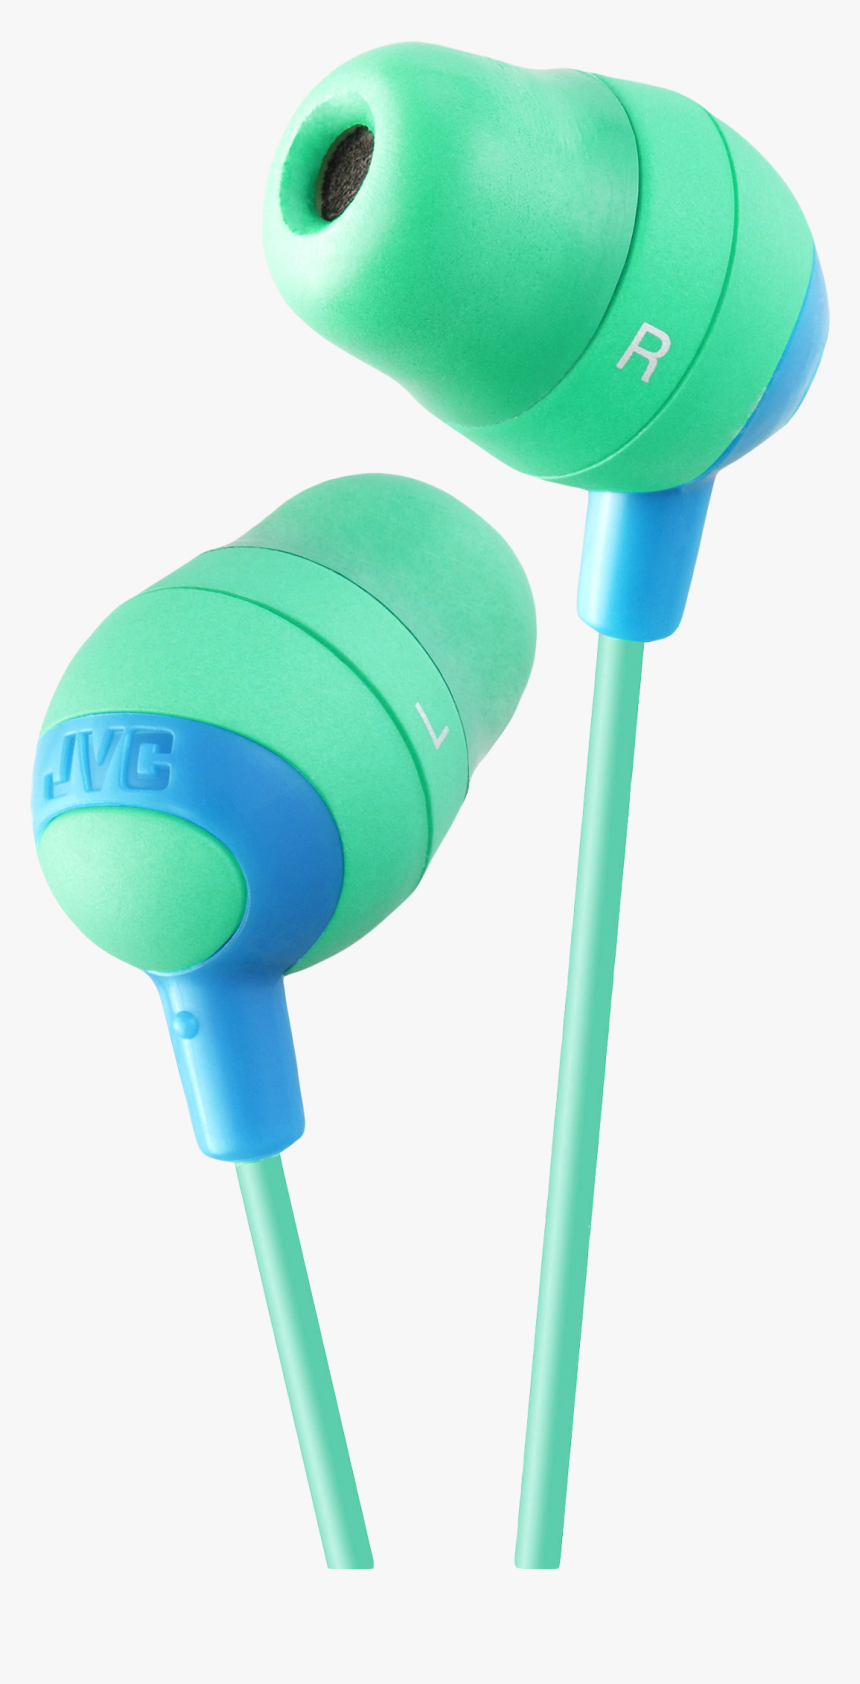 Earphone Png, Transparent Png, Free Download